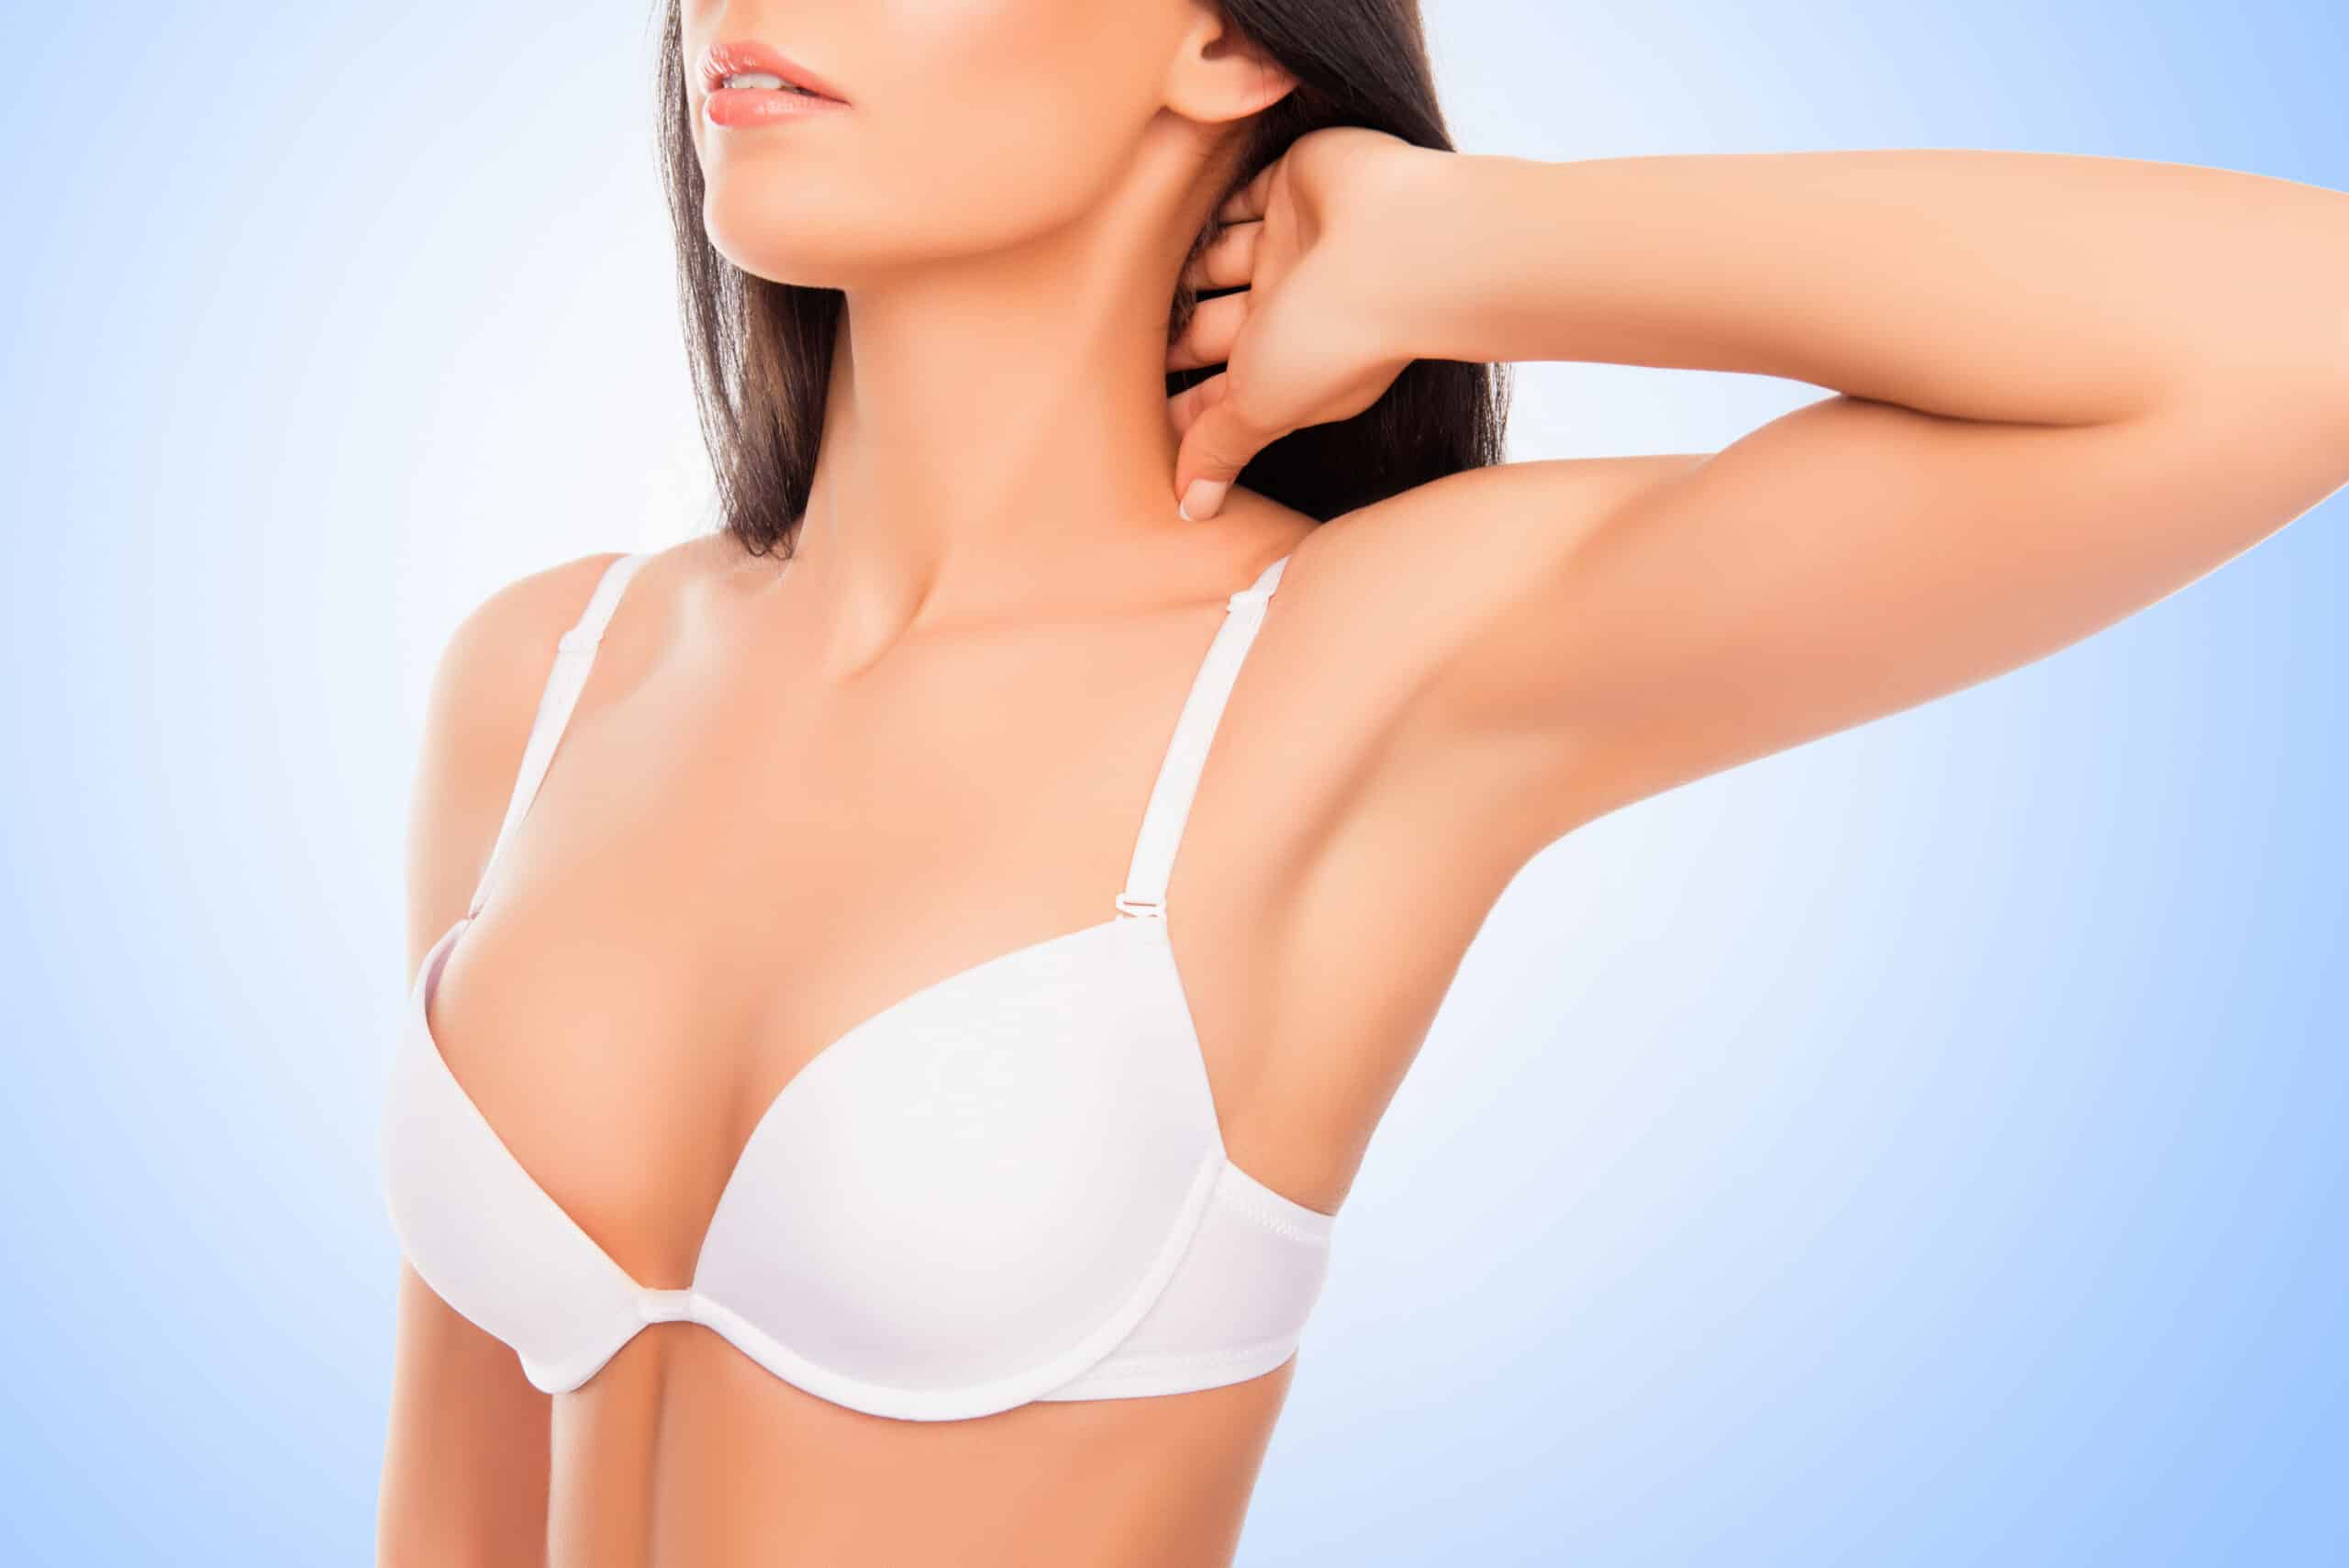 The Vampire Breast Lift Helps to Fix Rippling & Double Bubble from